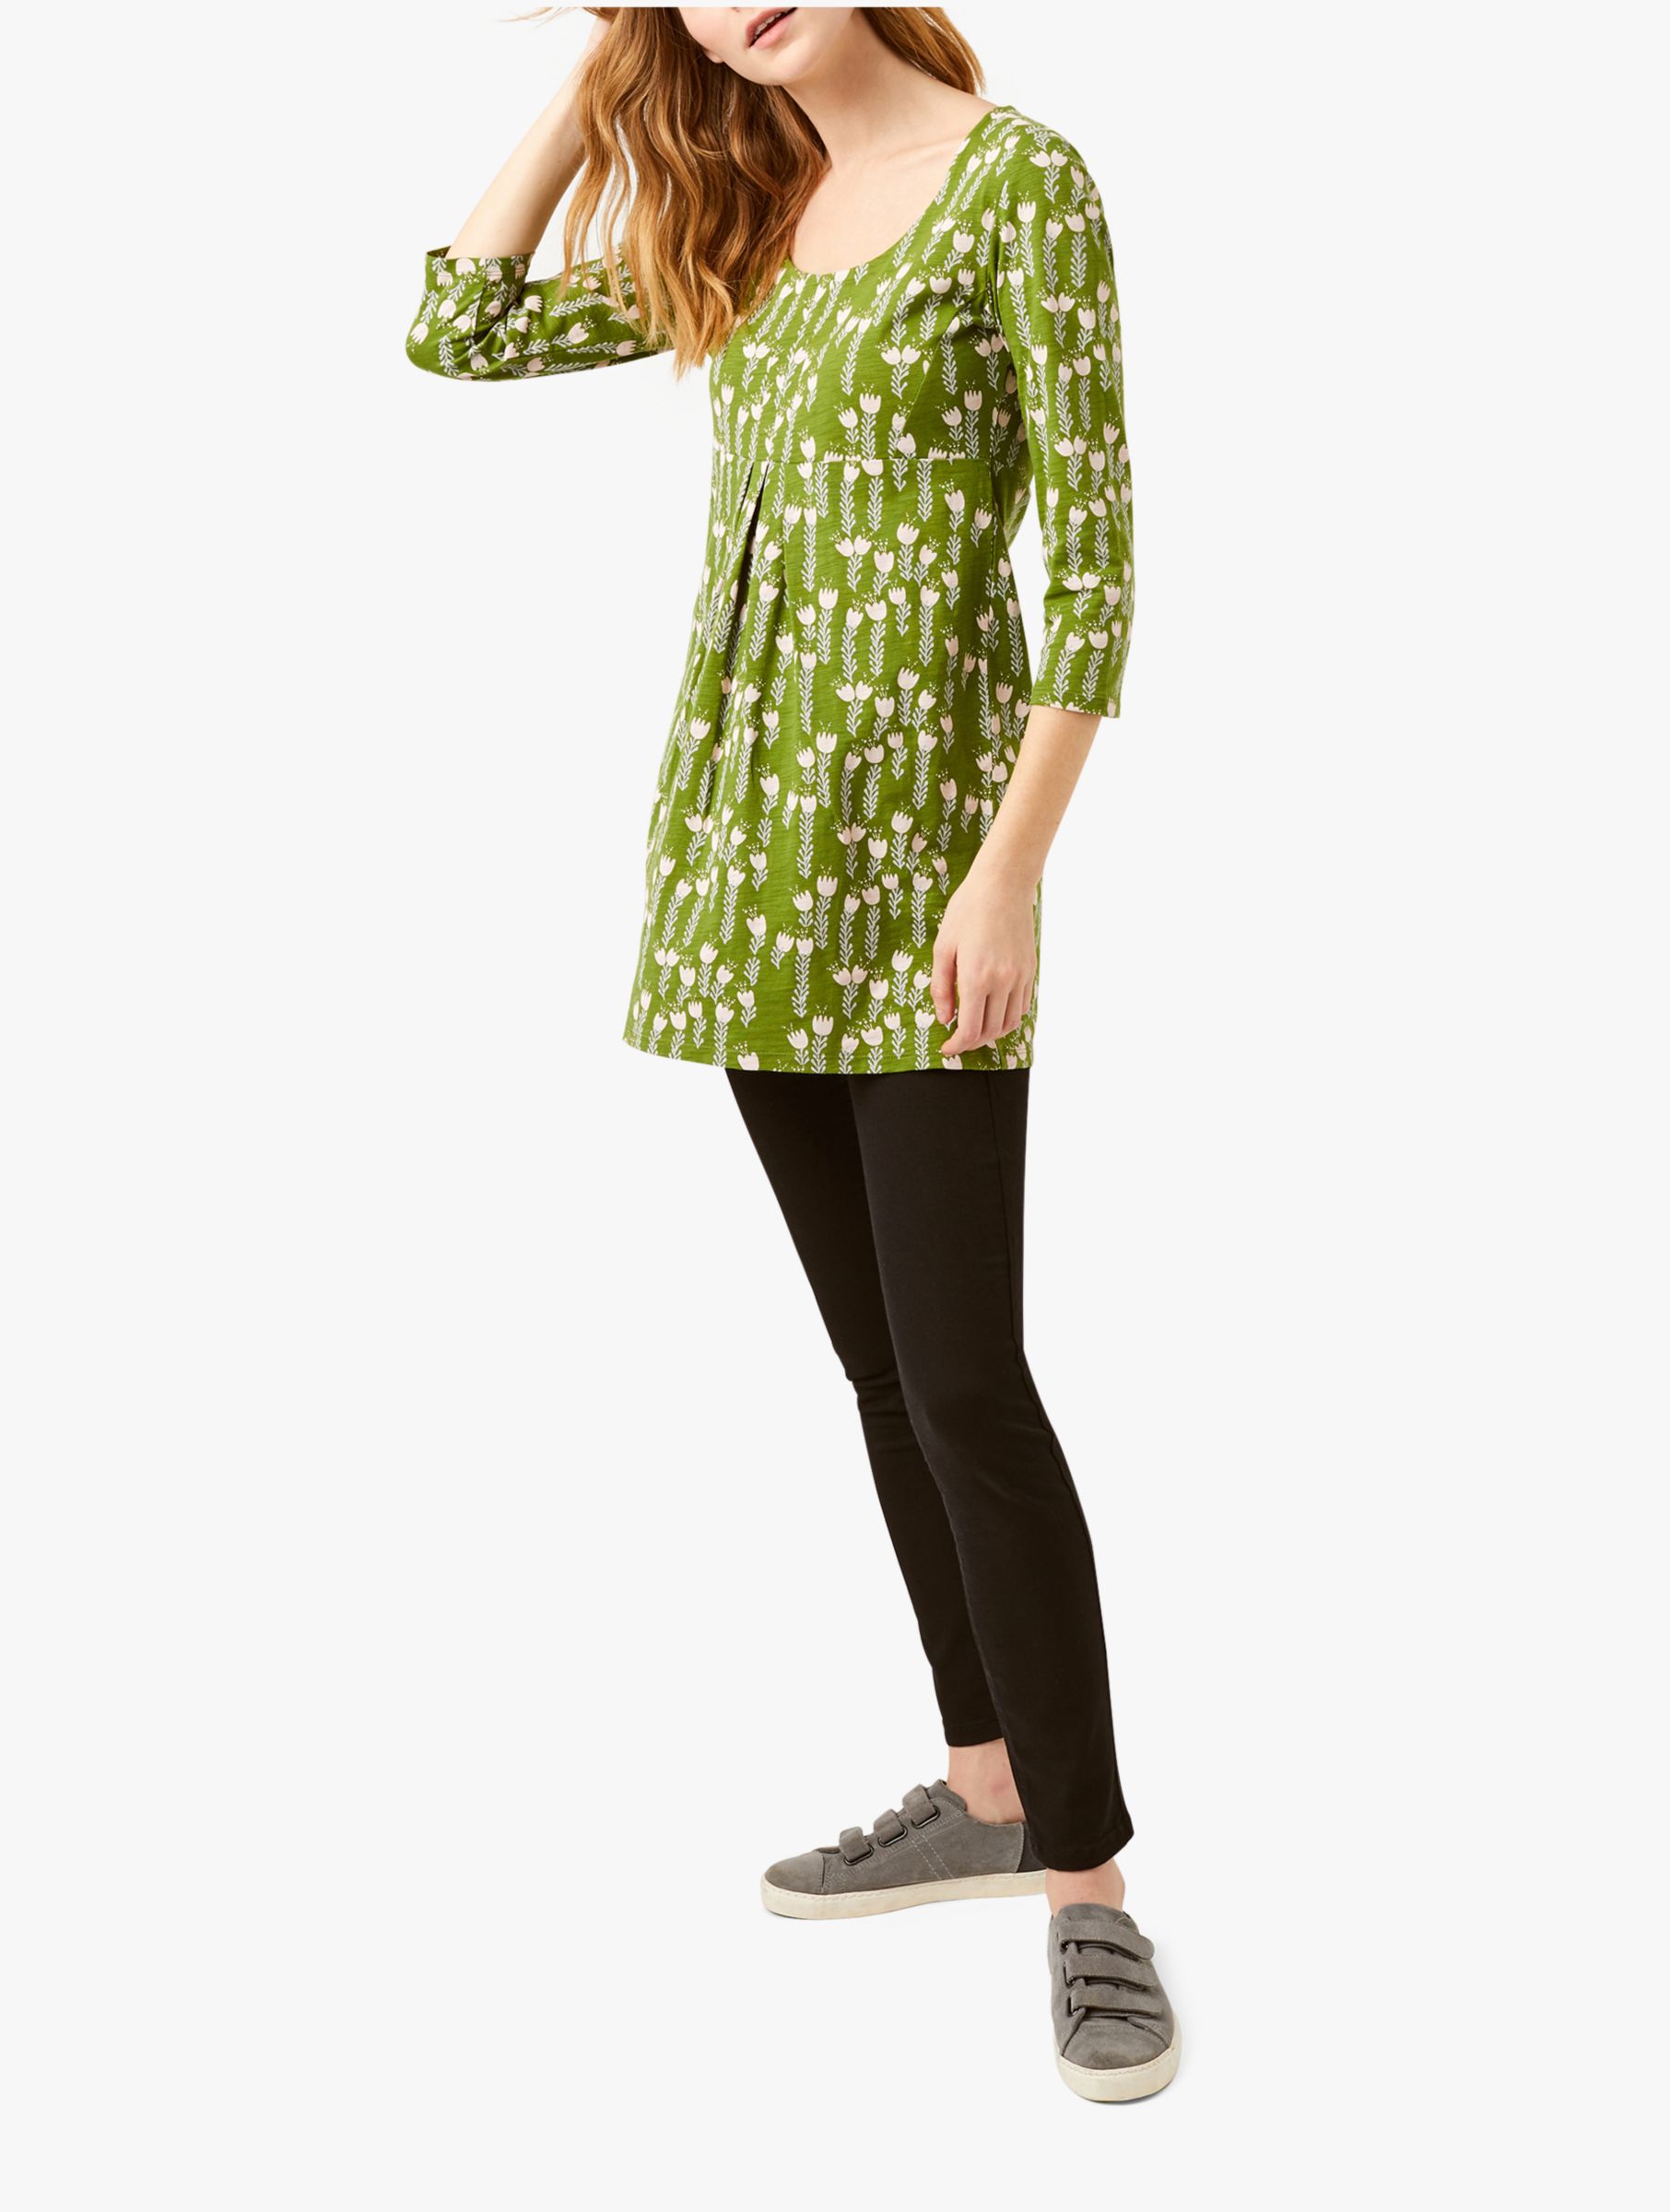 White Stuff Pippy Floral Cotton Jersey Tunic Top, Ivy Green